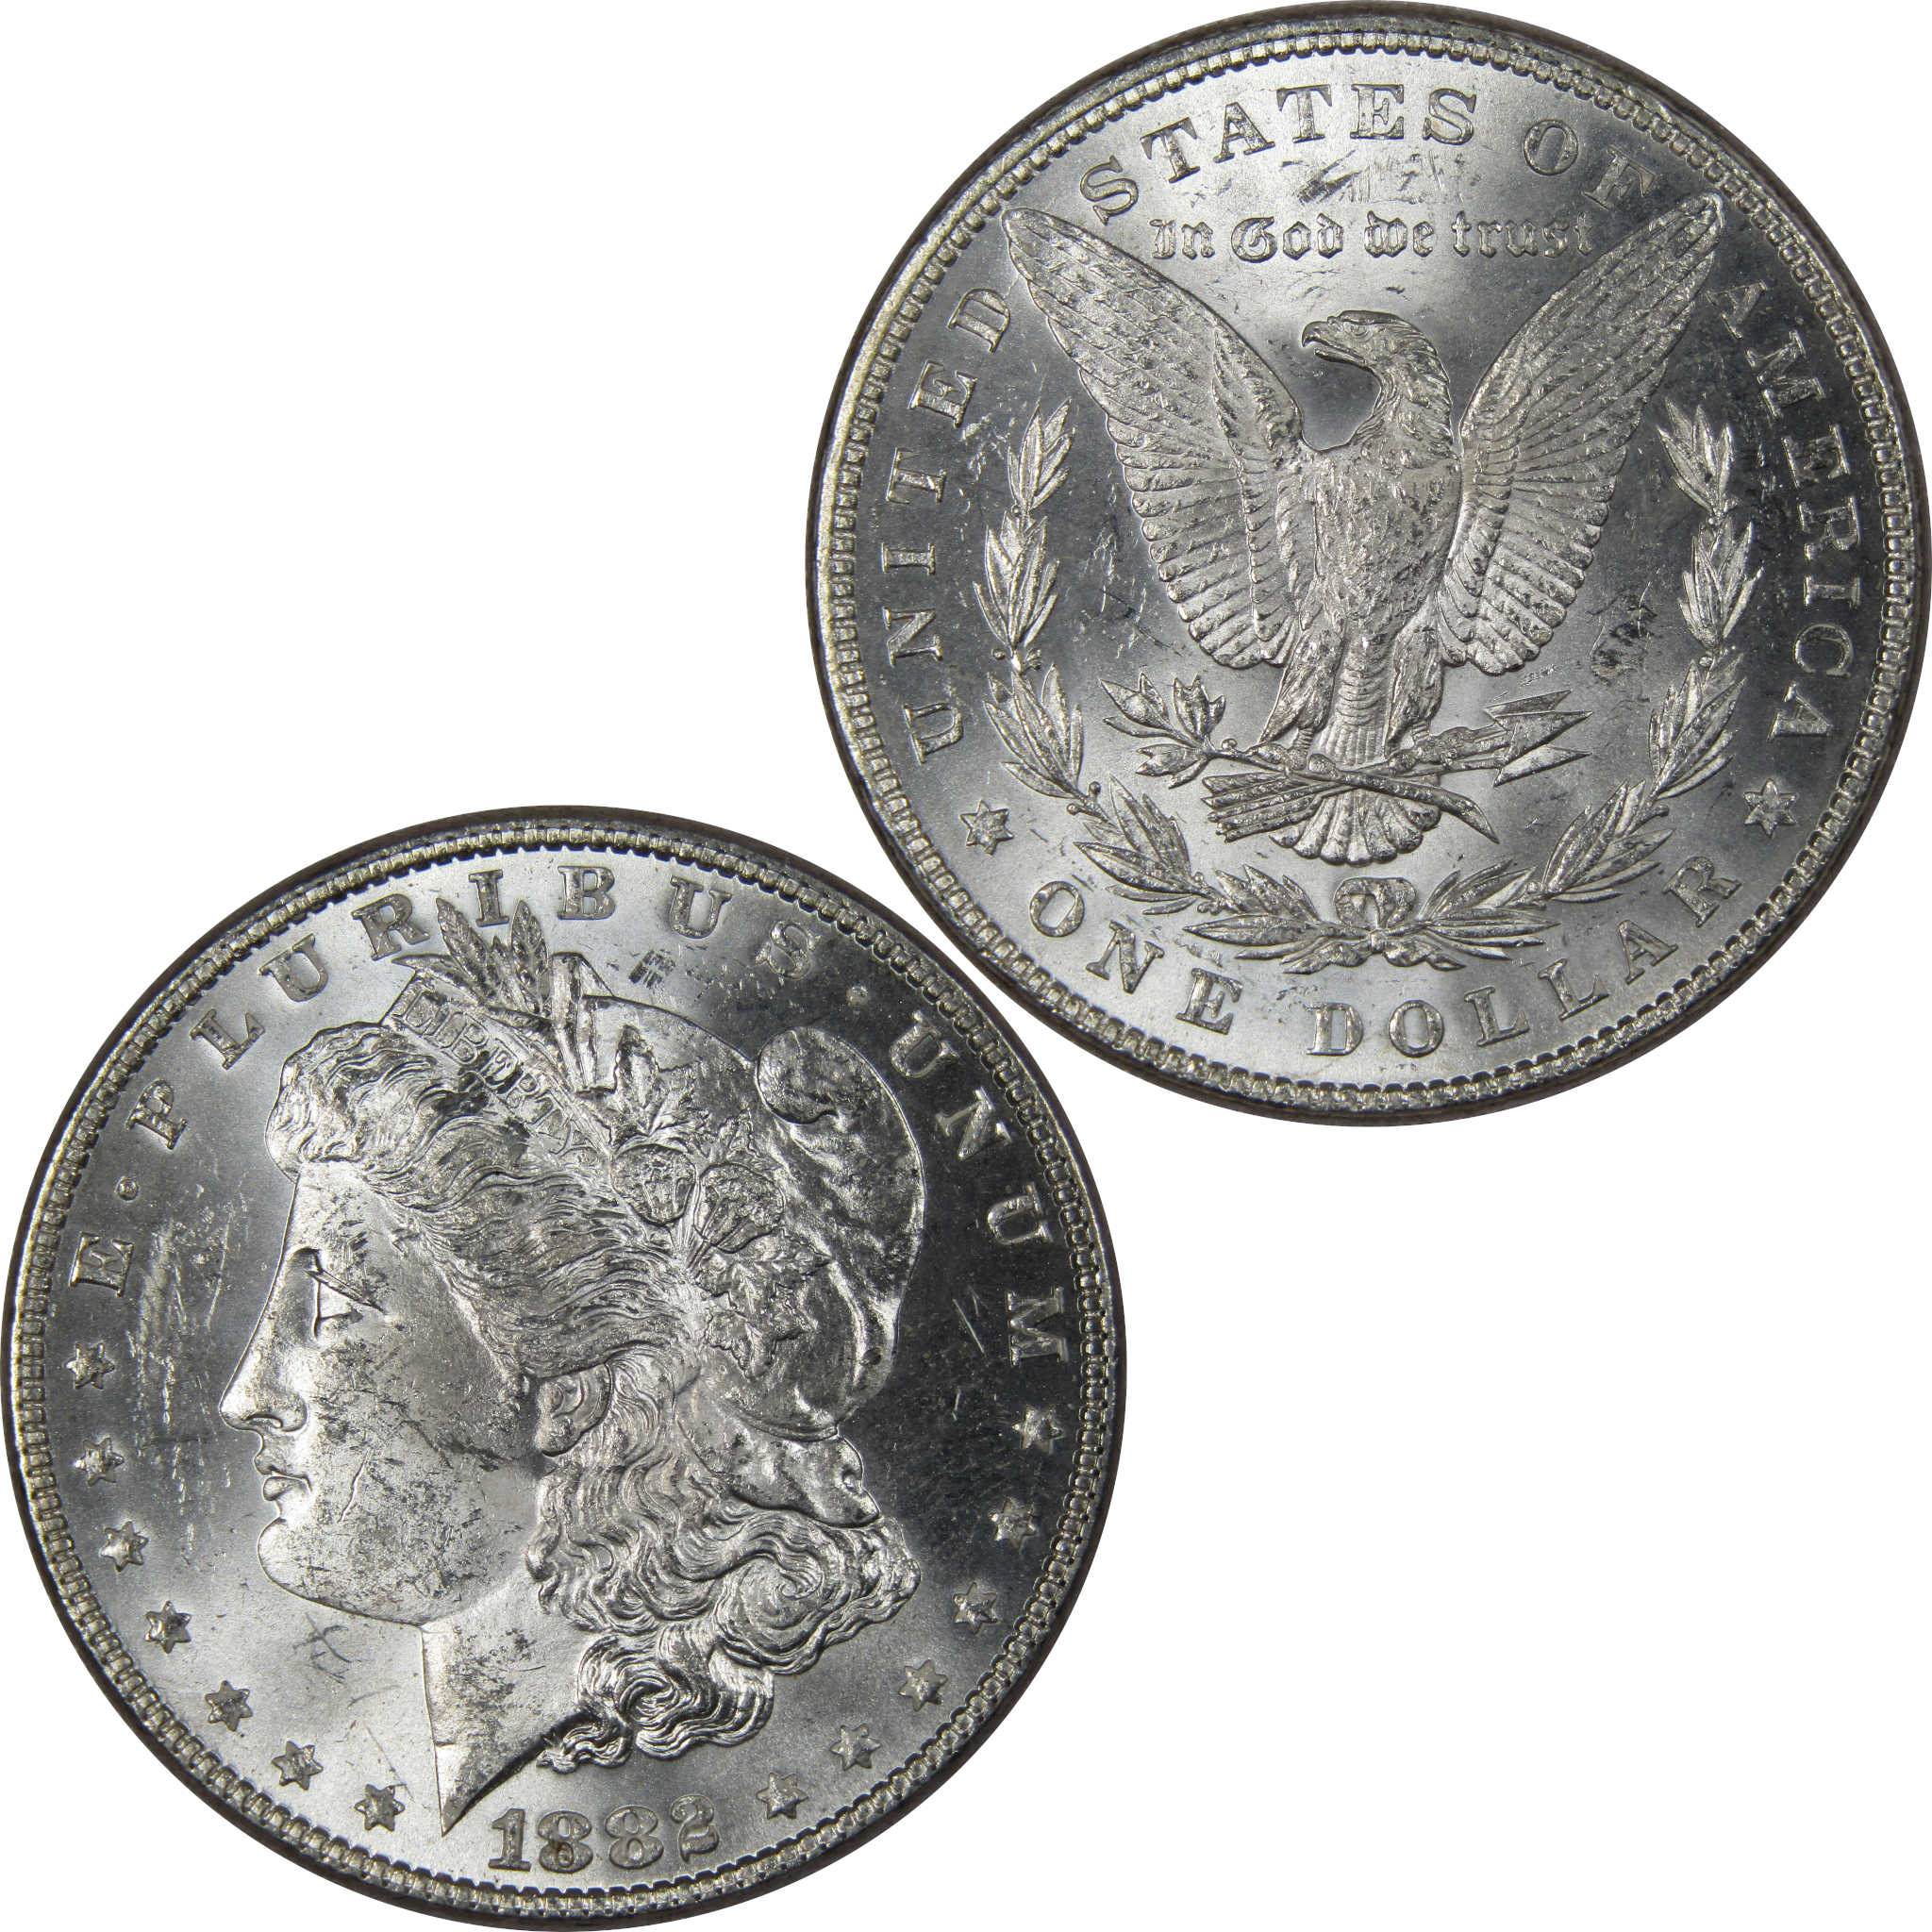 1882 Morgan Dollar BU Uncirculated Mint State 90% Silver SKU:IPC9692 - Morgan coin - Morgan silver dollar - Morgan silver dollar for sale - Profile Coins &amp; Collectibles